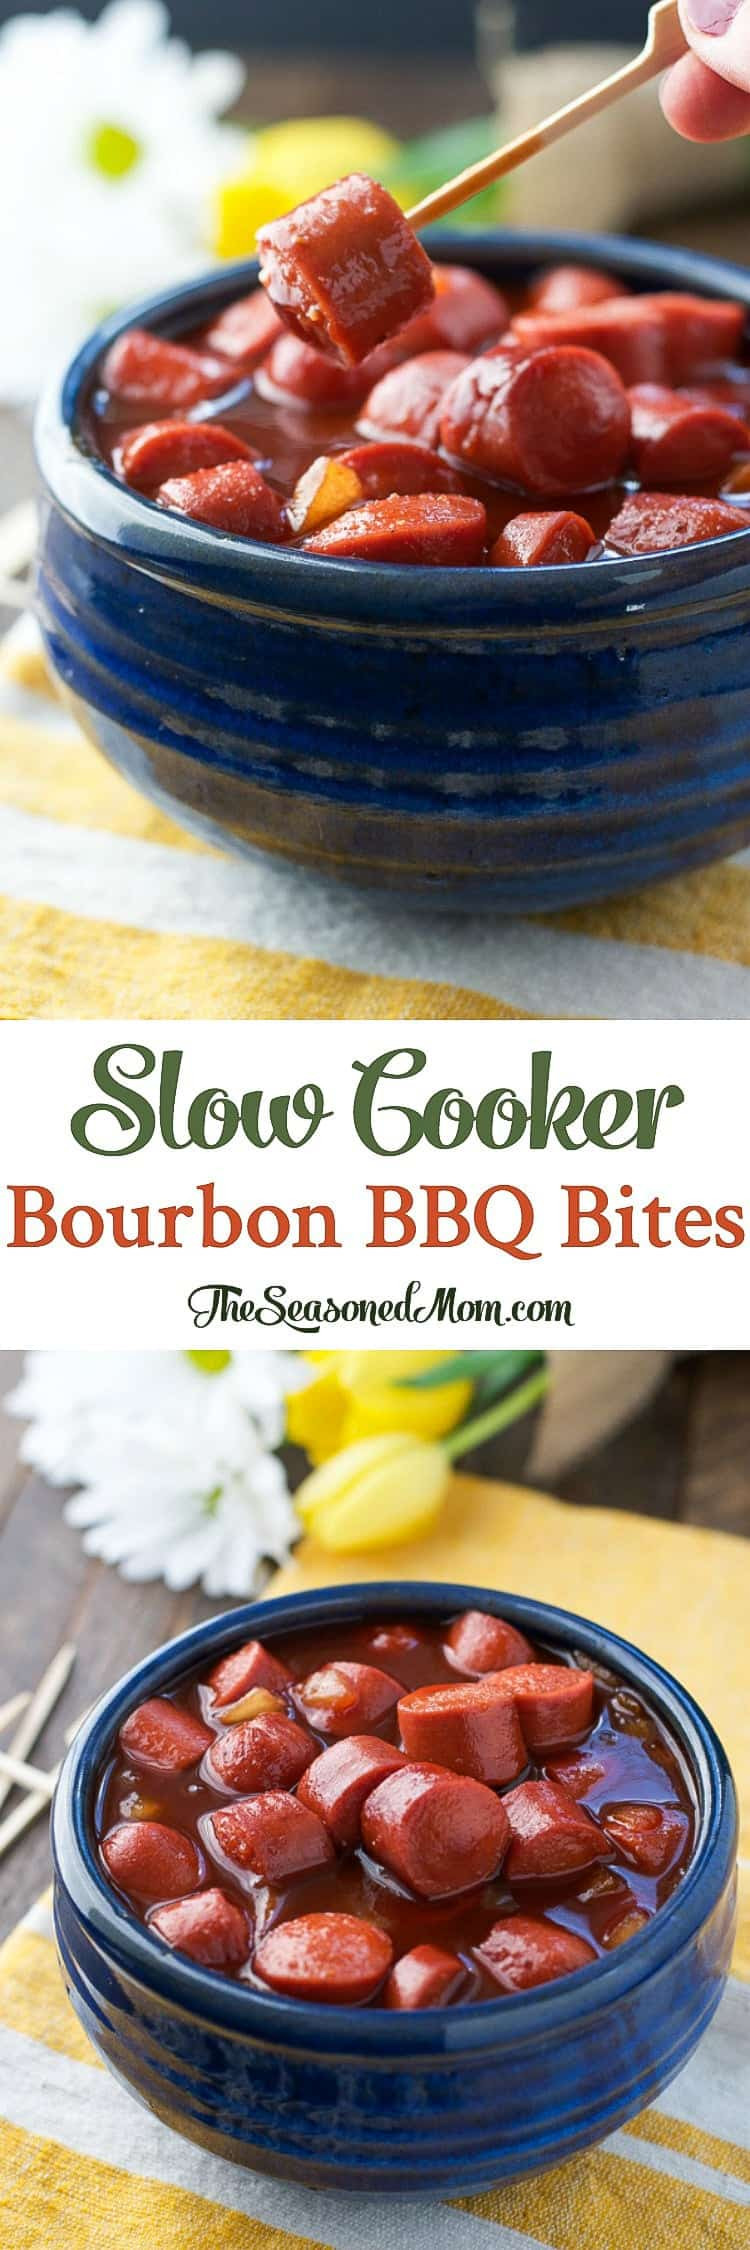 14 Easy Slow Cooker Appetizers
 Easy Appetizers Slow Cooker Bourbon Barbecue Bites The